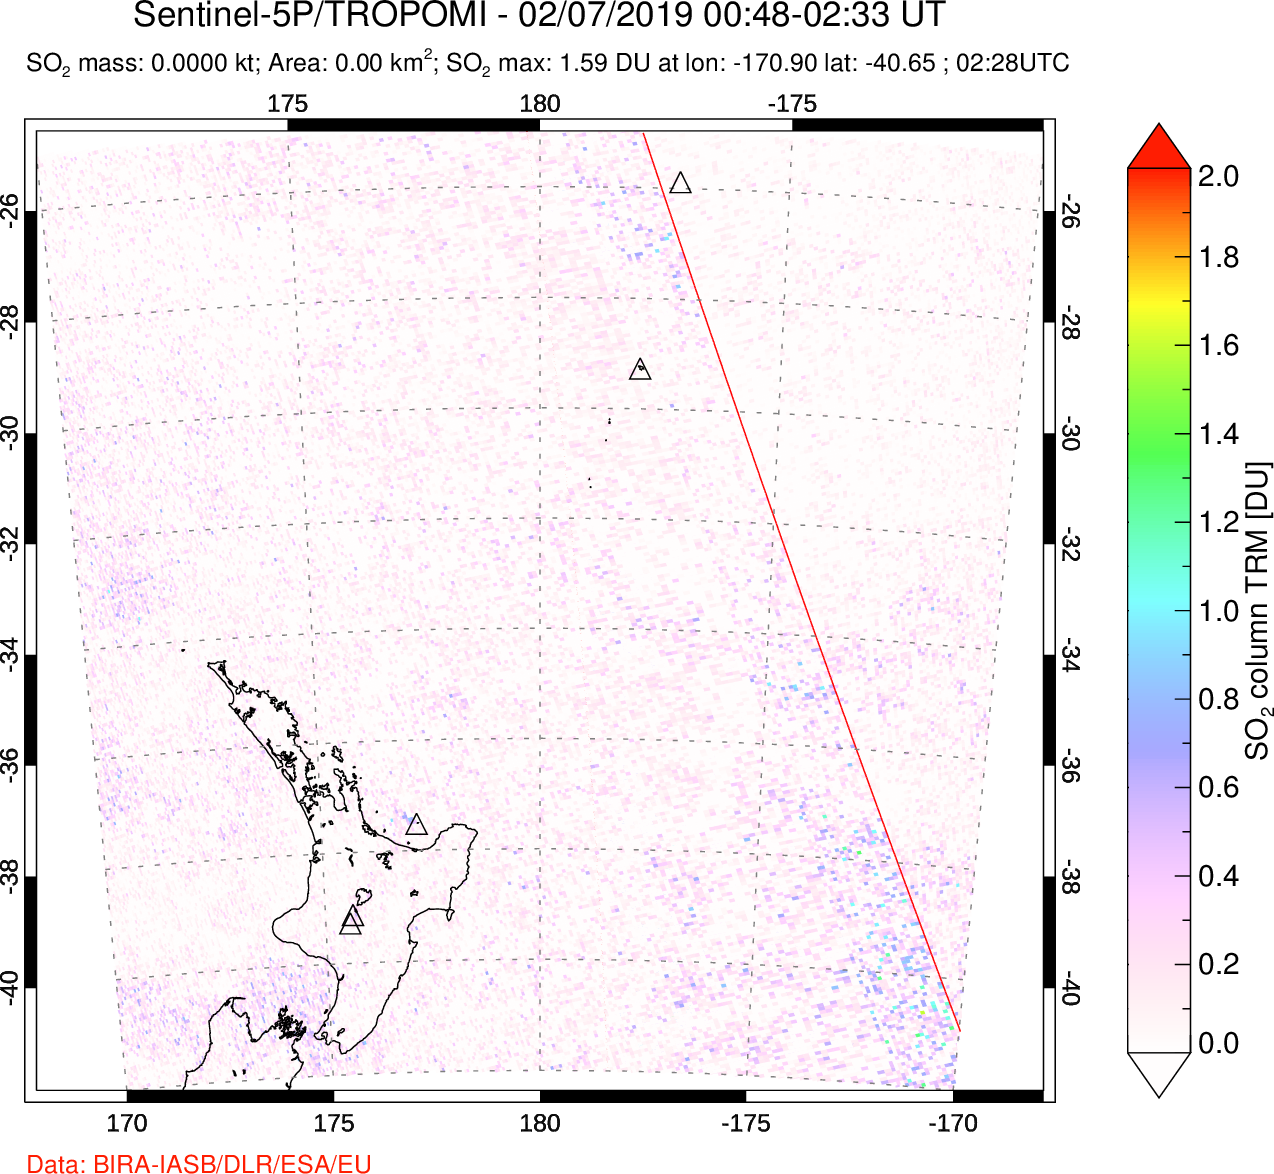 A sulfur dioxide image over New Zealand on Feb 07, 2019.